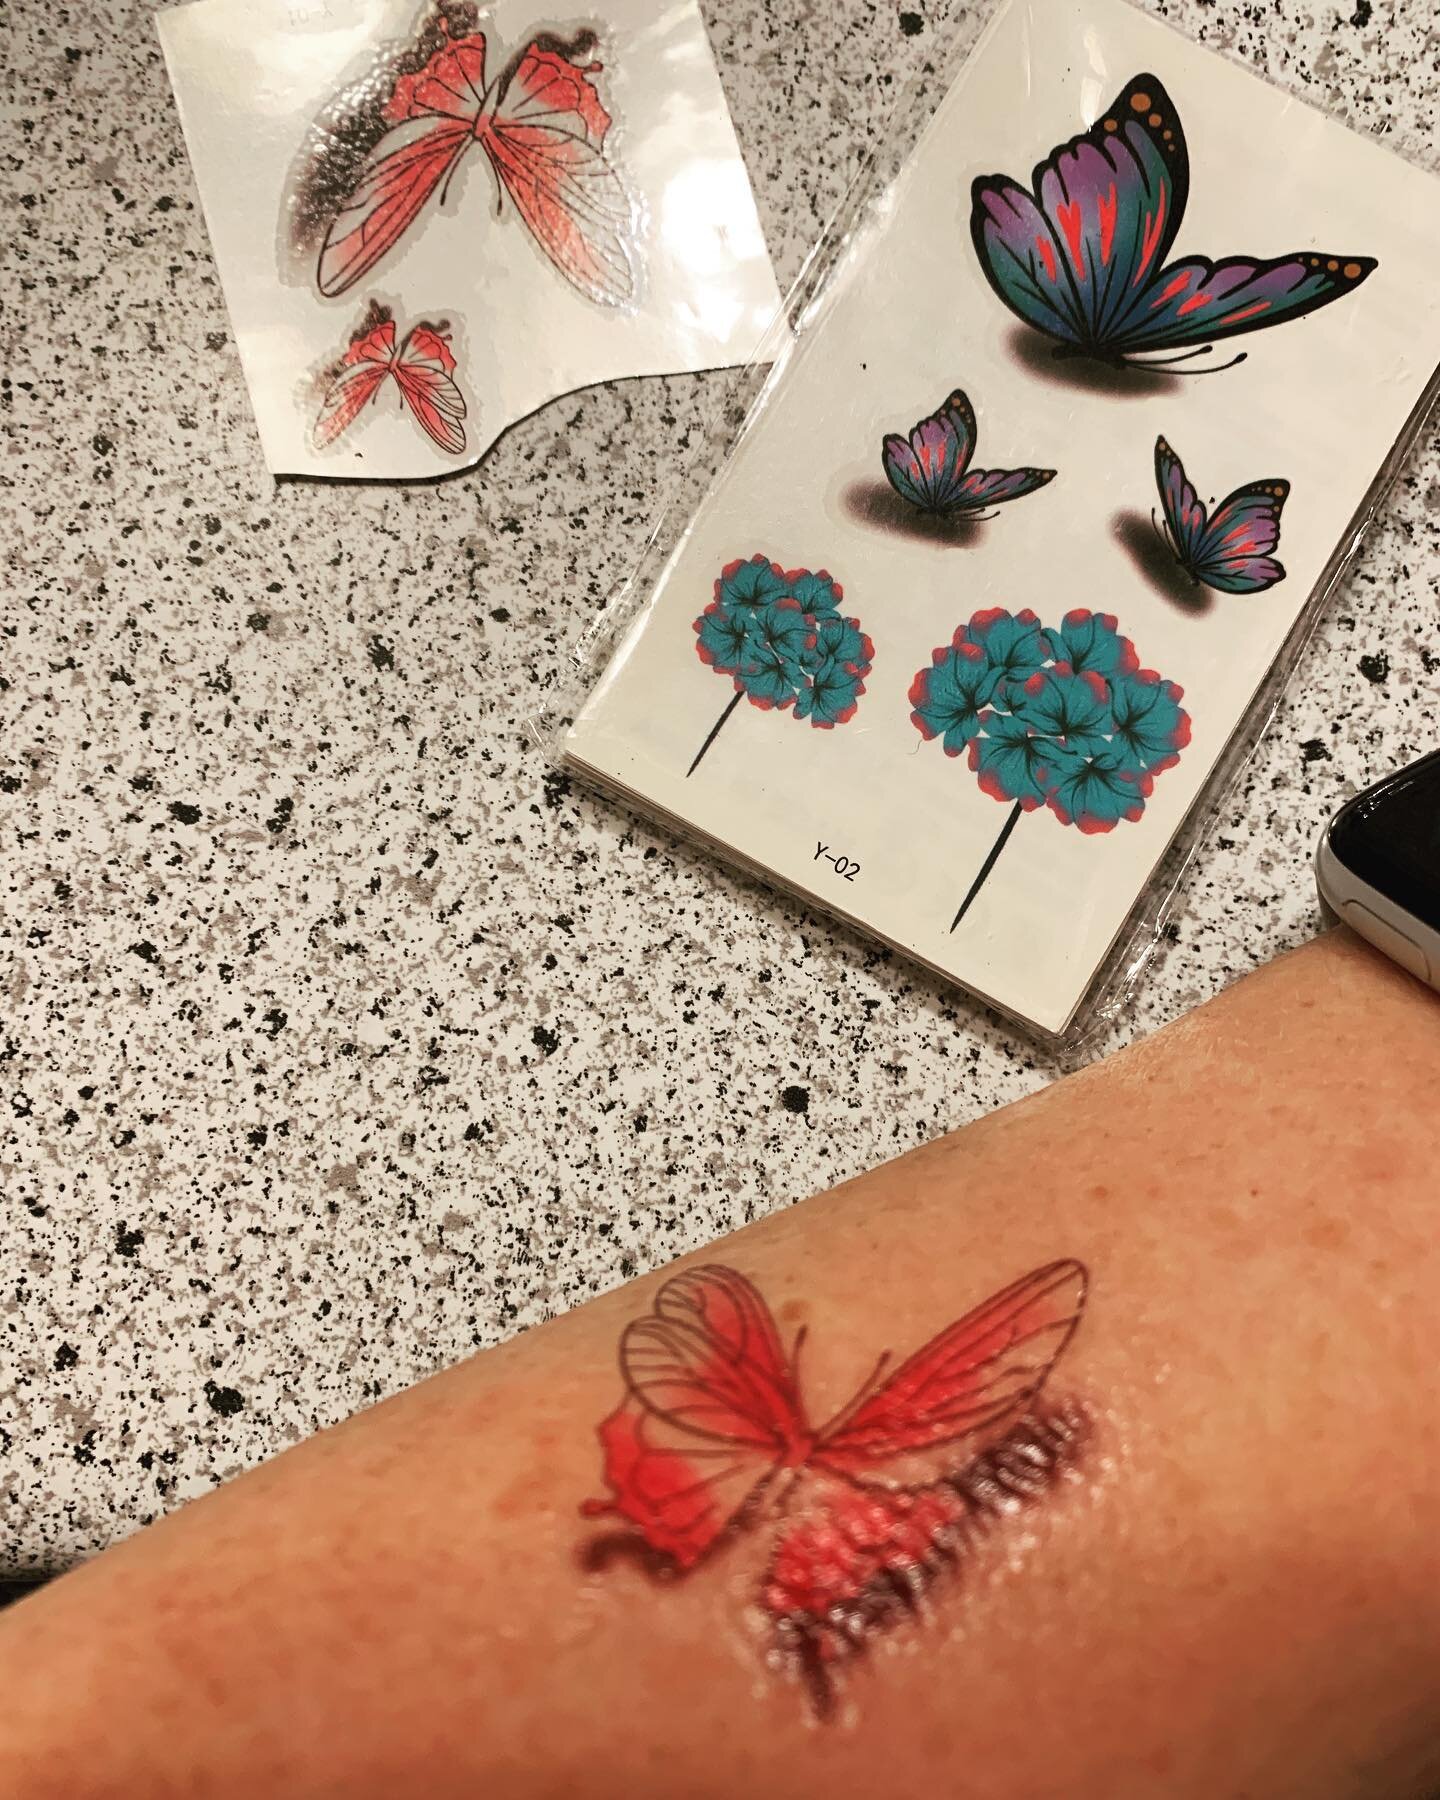 Found these cute 3D butterfly tattoos for my prize box for #woolyweek fun! #No nos temas #somosnormales